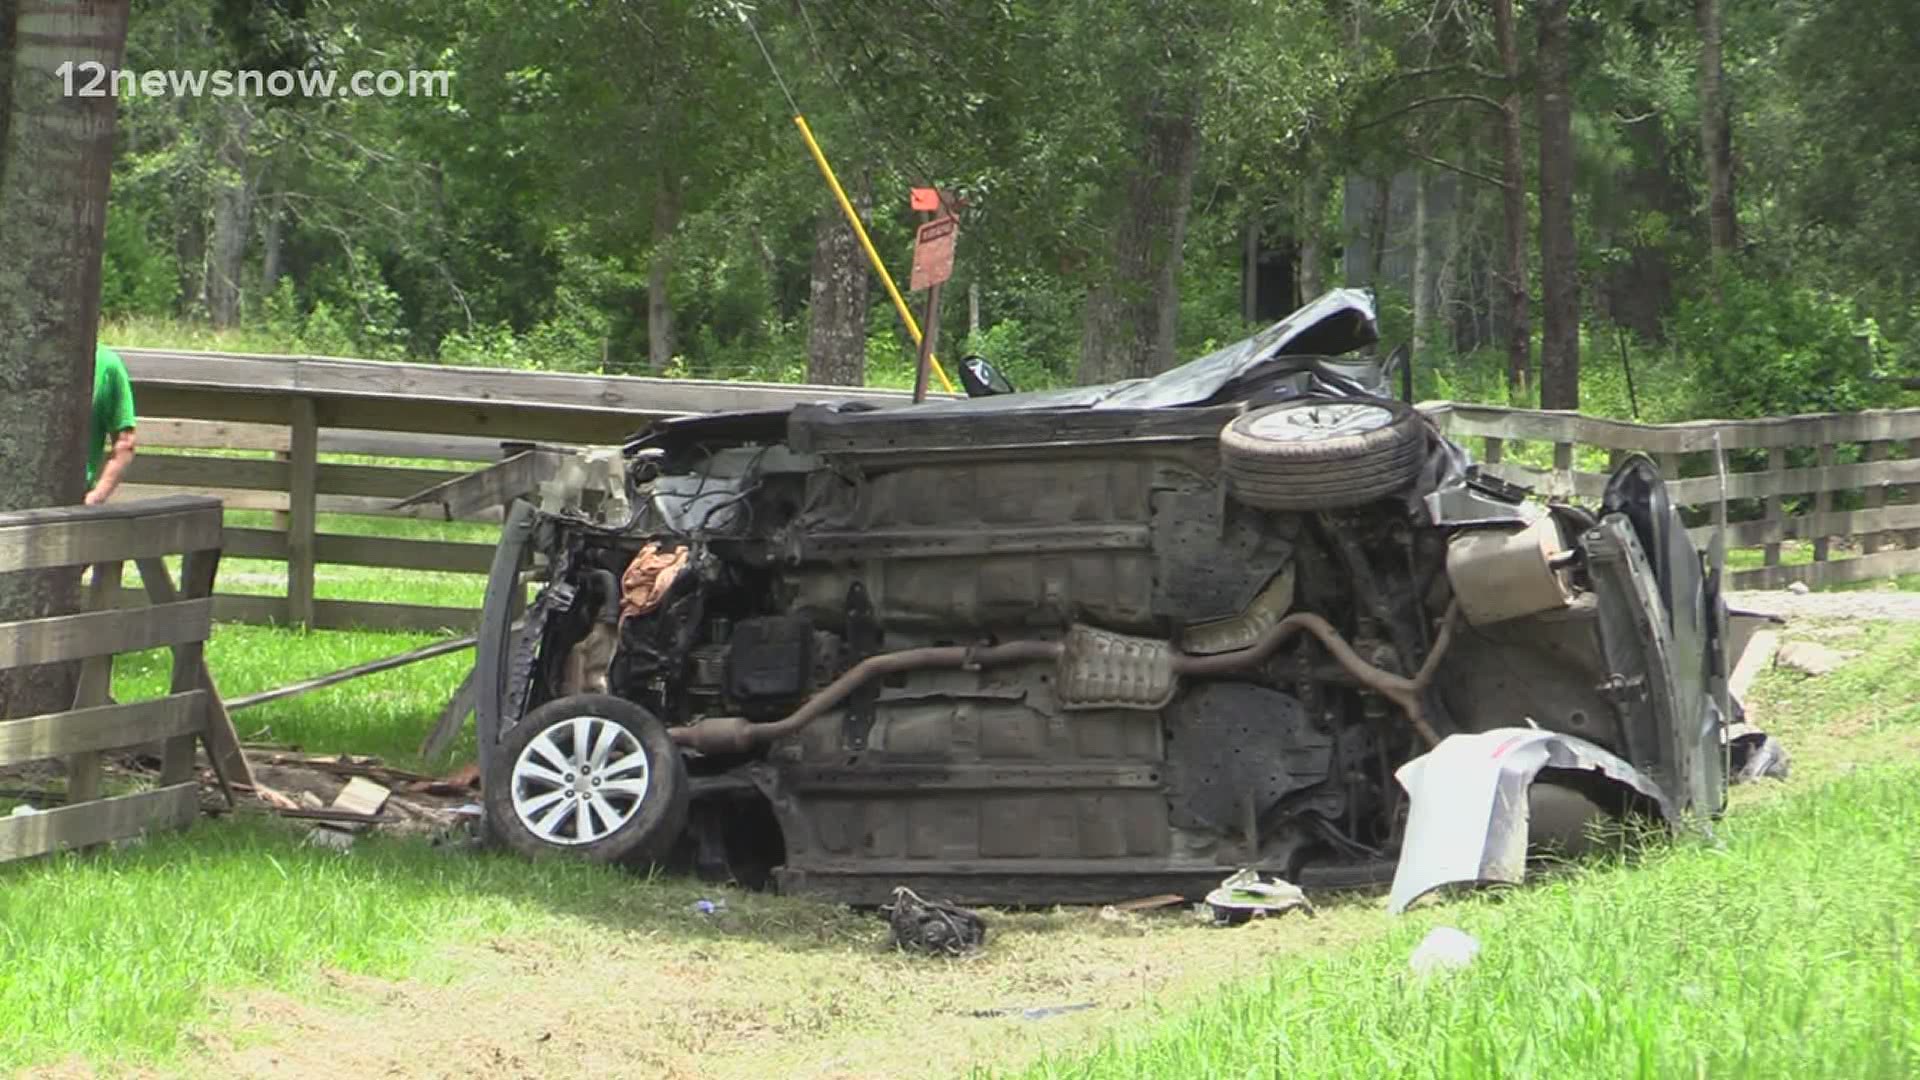 First responders responded to a one vehicle rollover accident in the 4000 block of FM 1136, around 1:30 p.m. The crash remains under investigation.